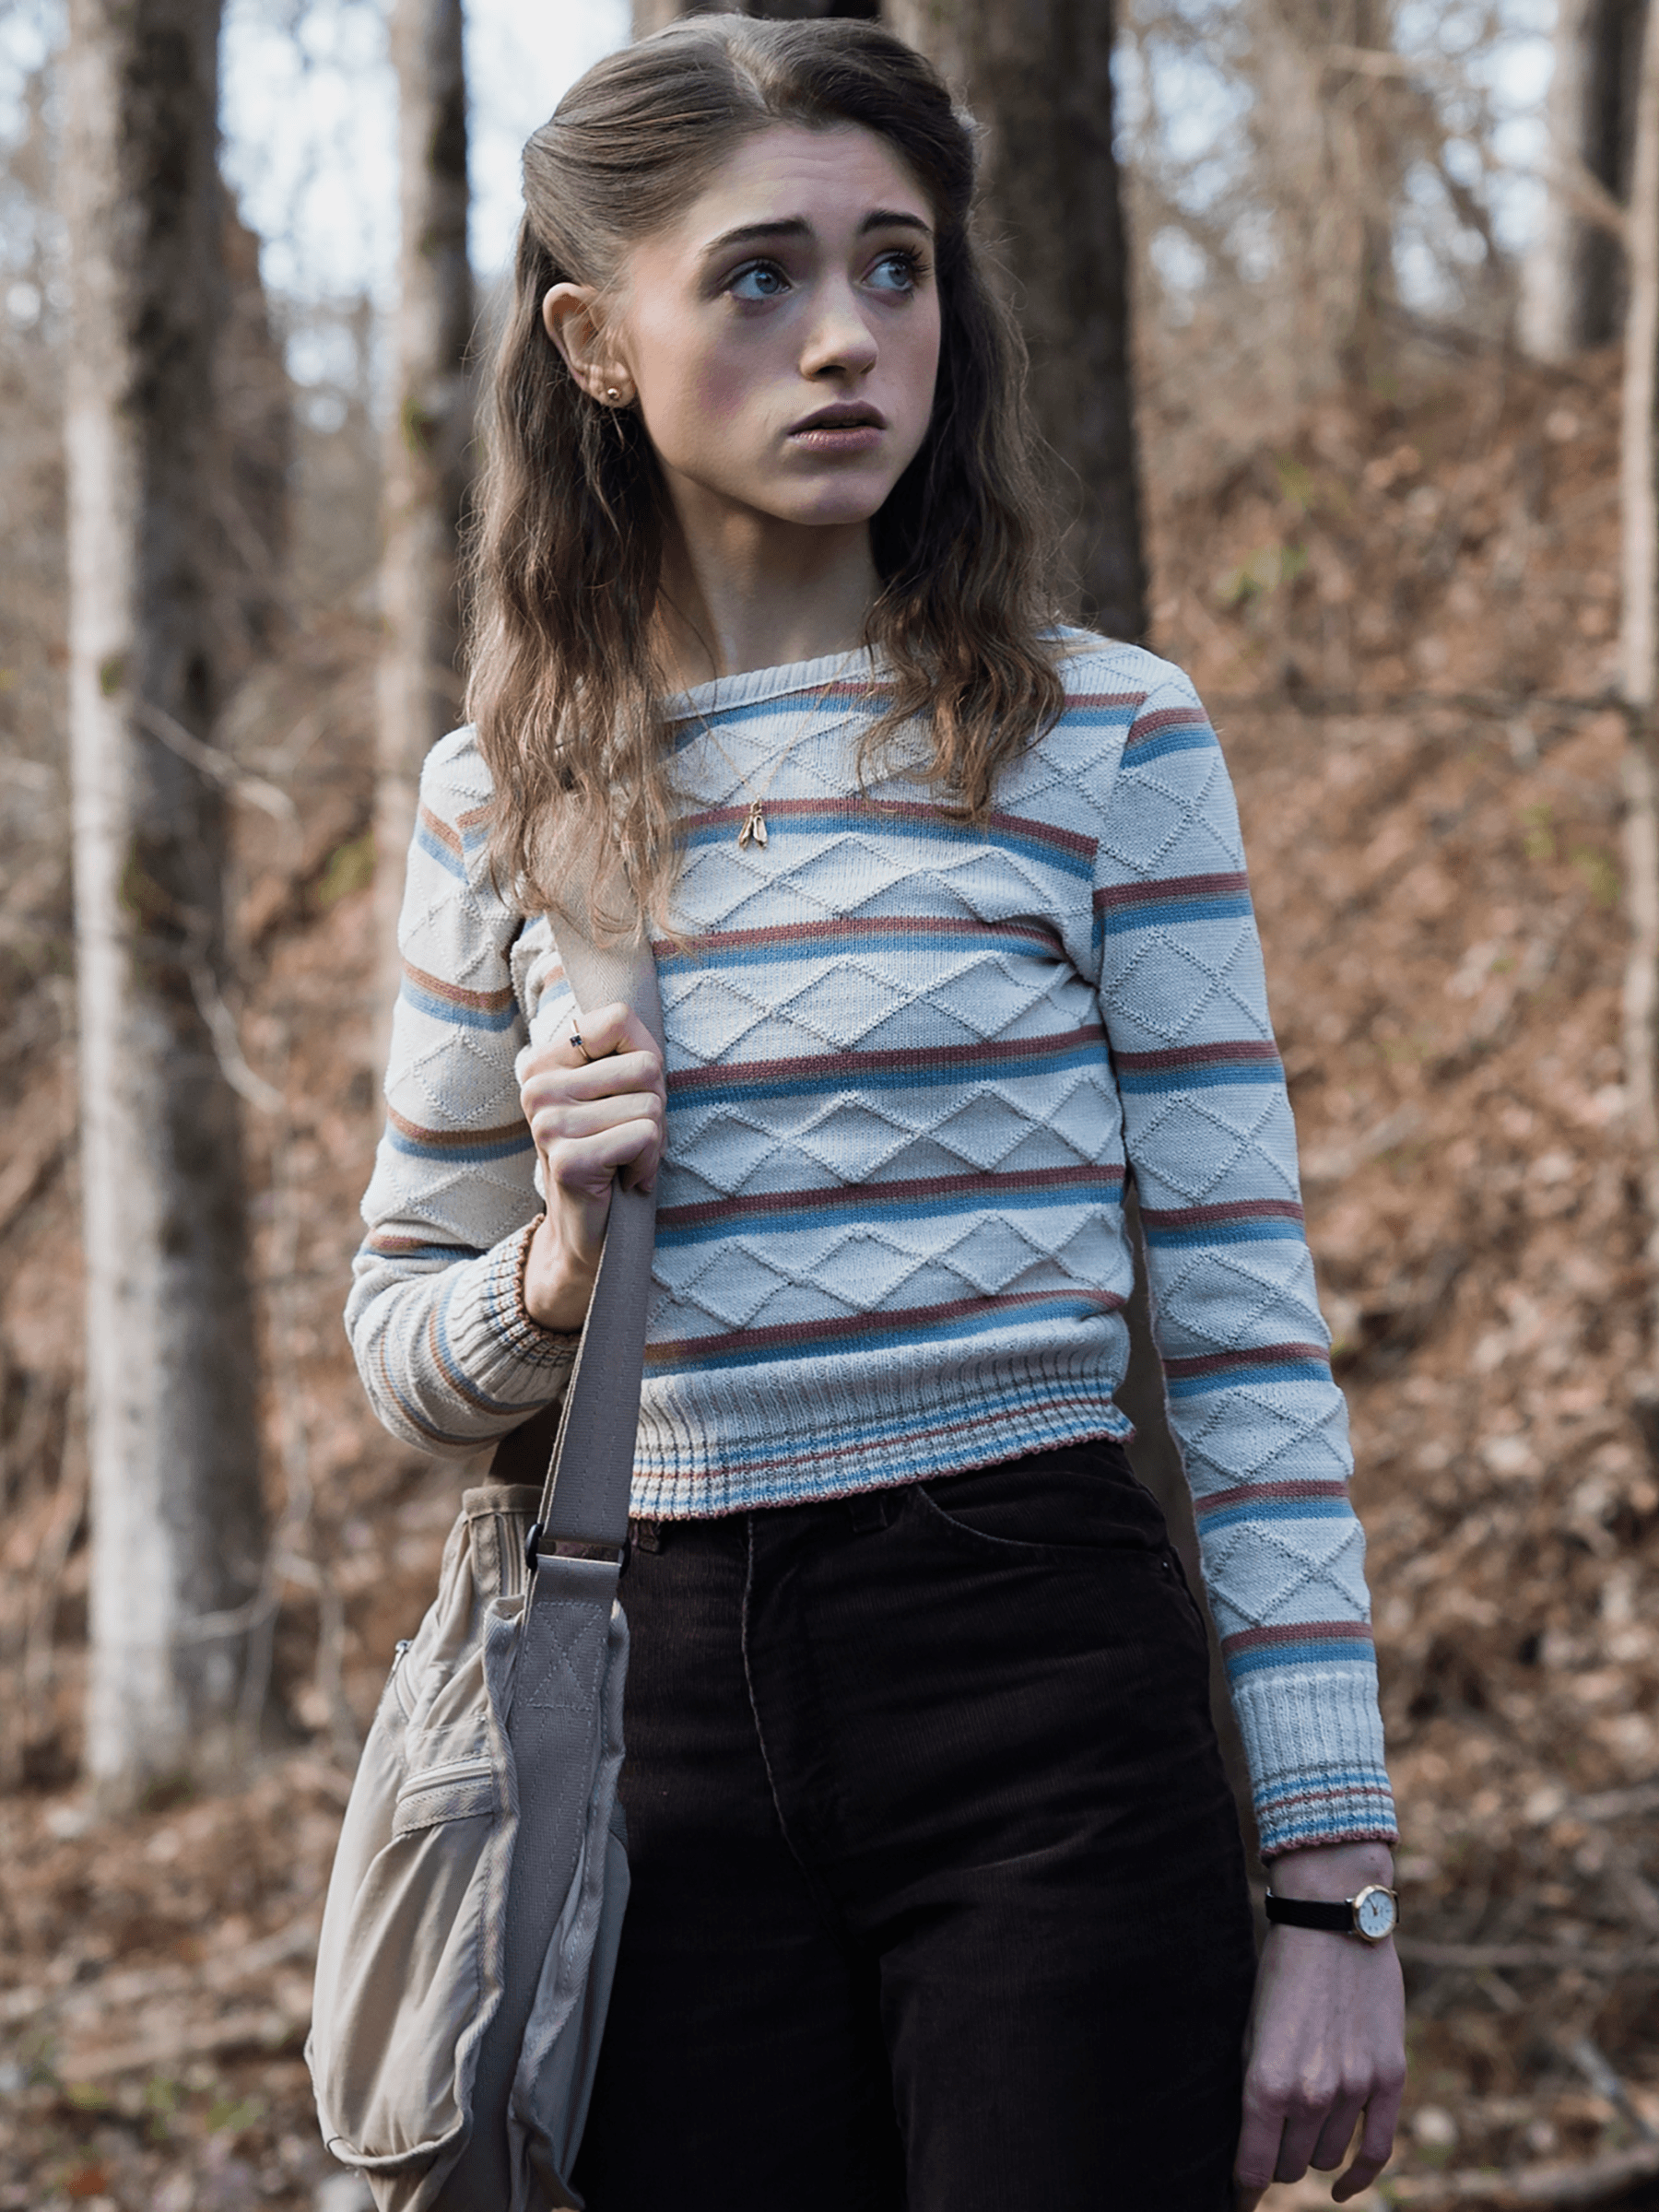 Natalia Dyer 2019 Wallpapers